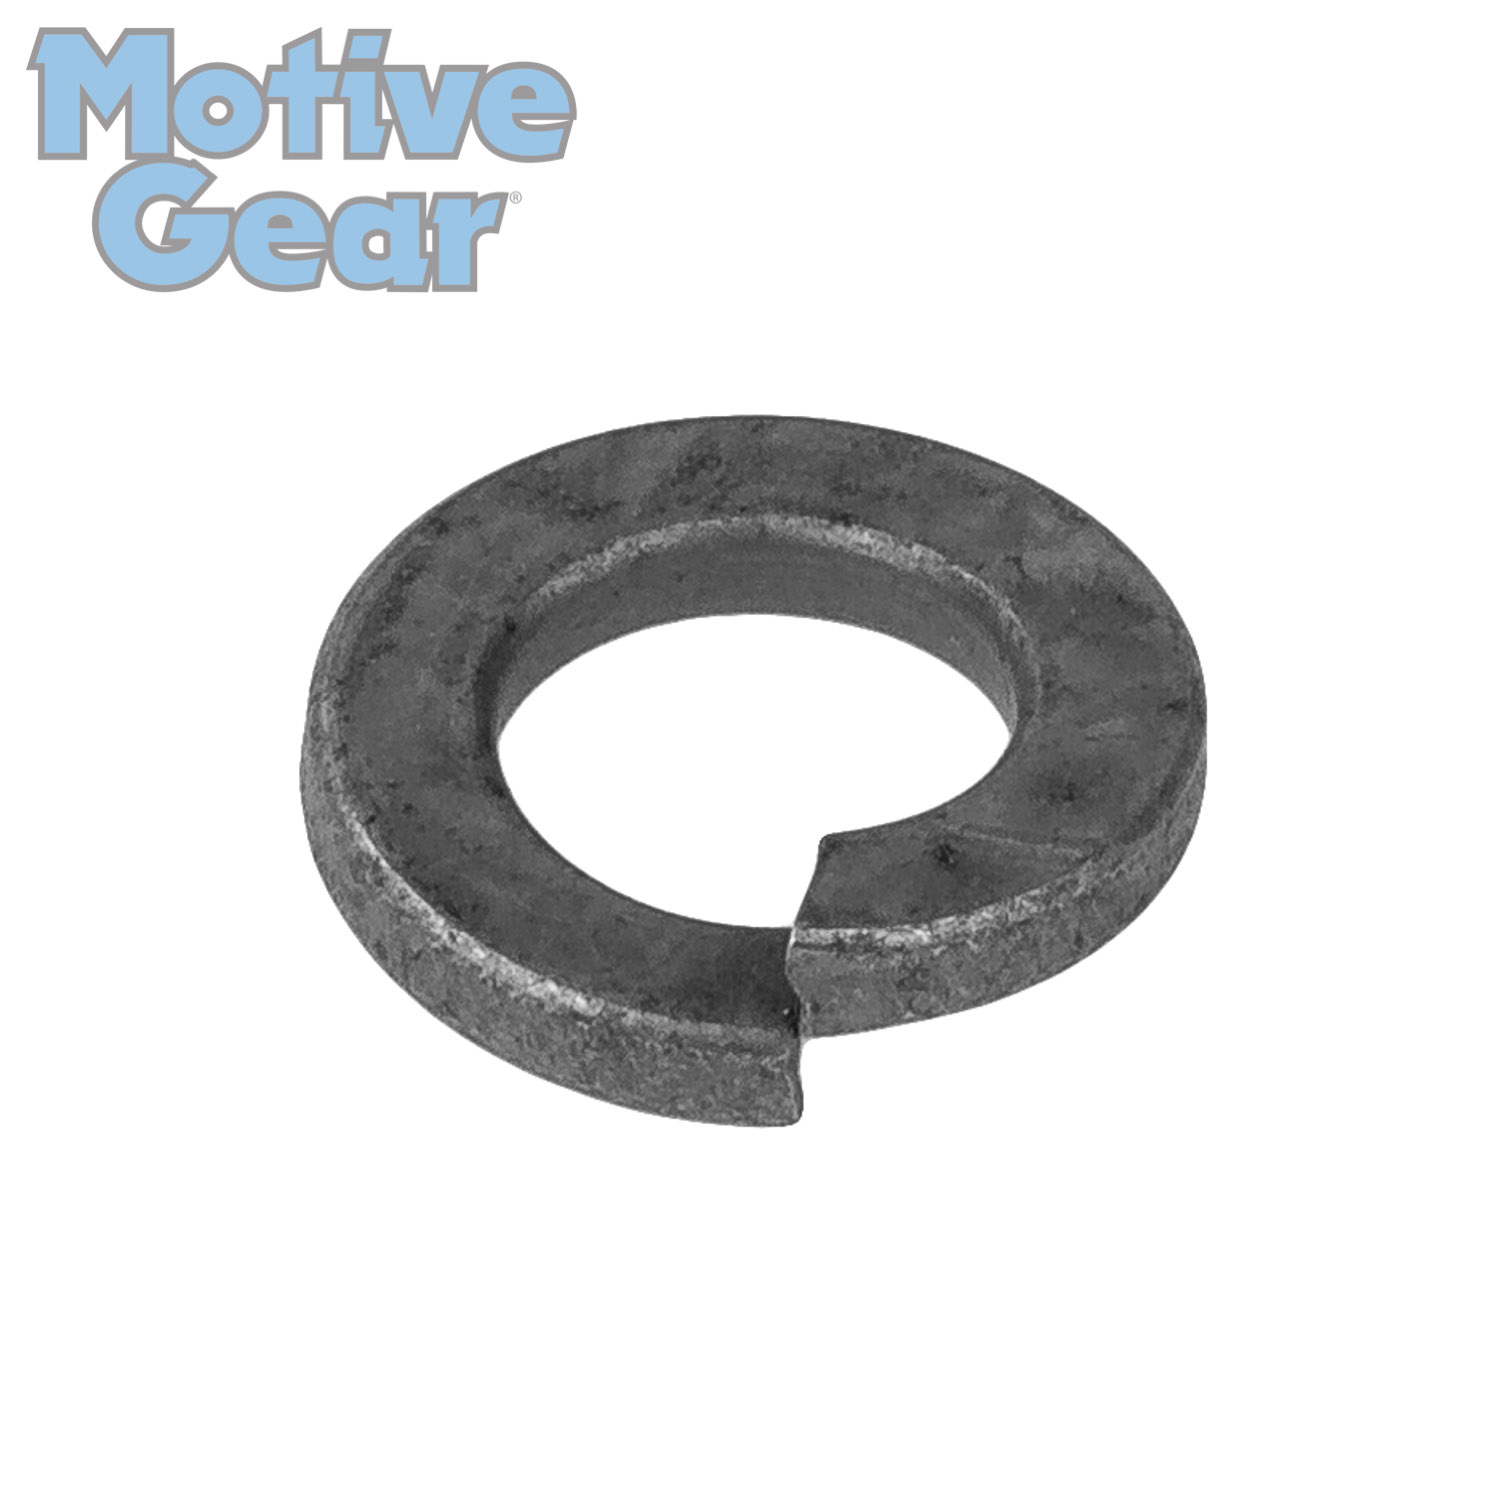 Show details for Motive Gear Differential Lock Washer